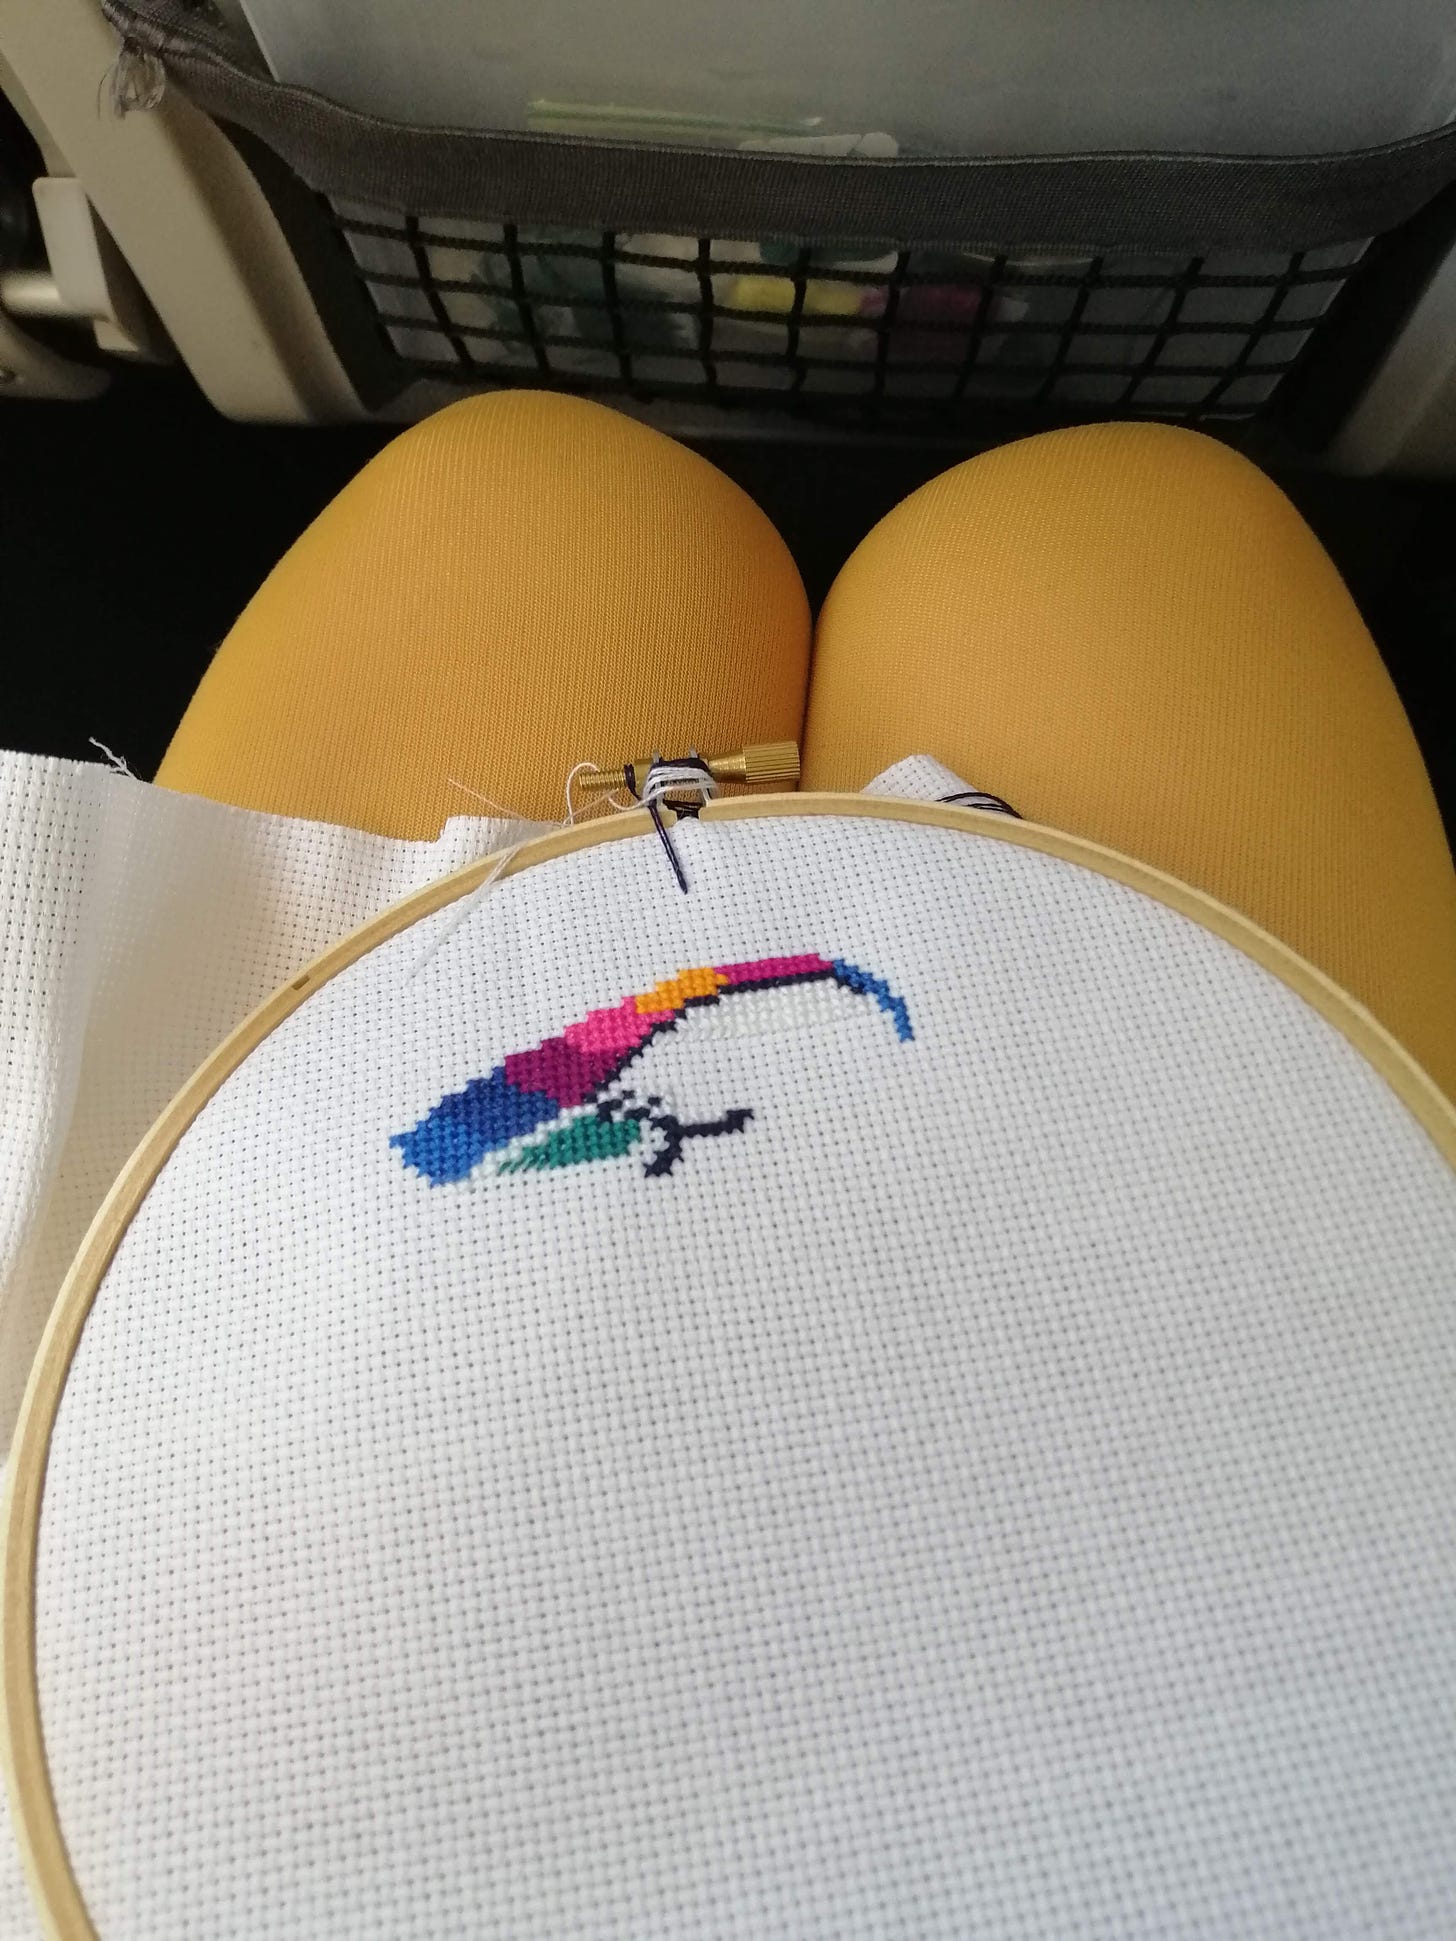 Photo taken inside an airplane showing my lap with a cross stitch project on it and stitching supplies in the seat pocket